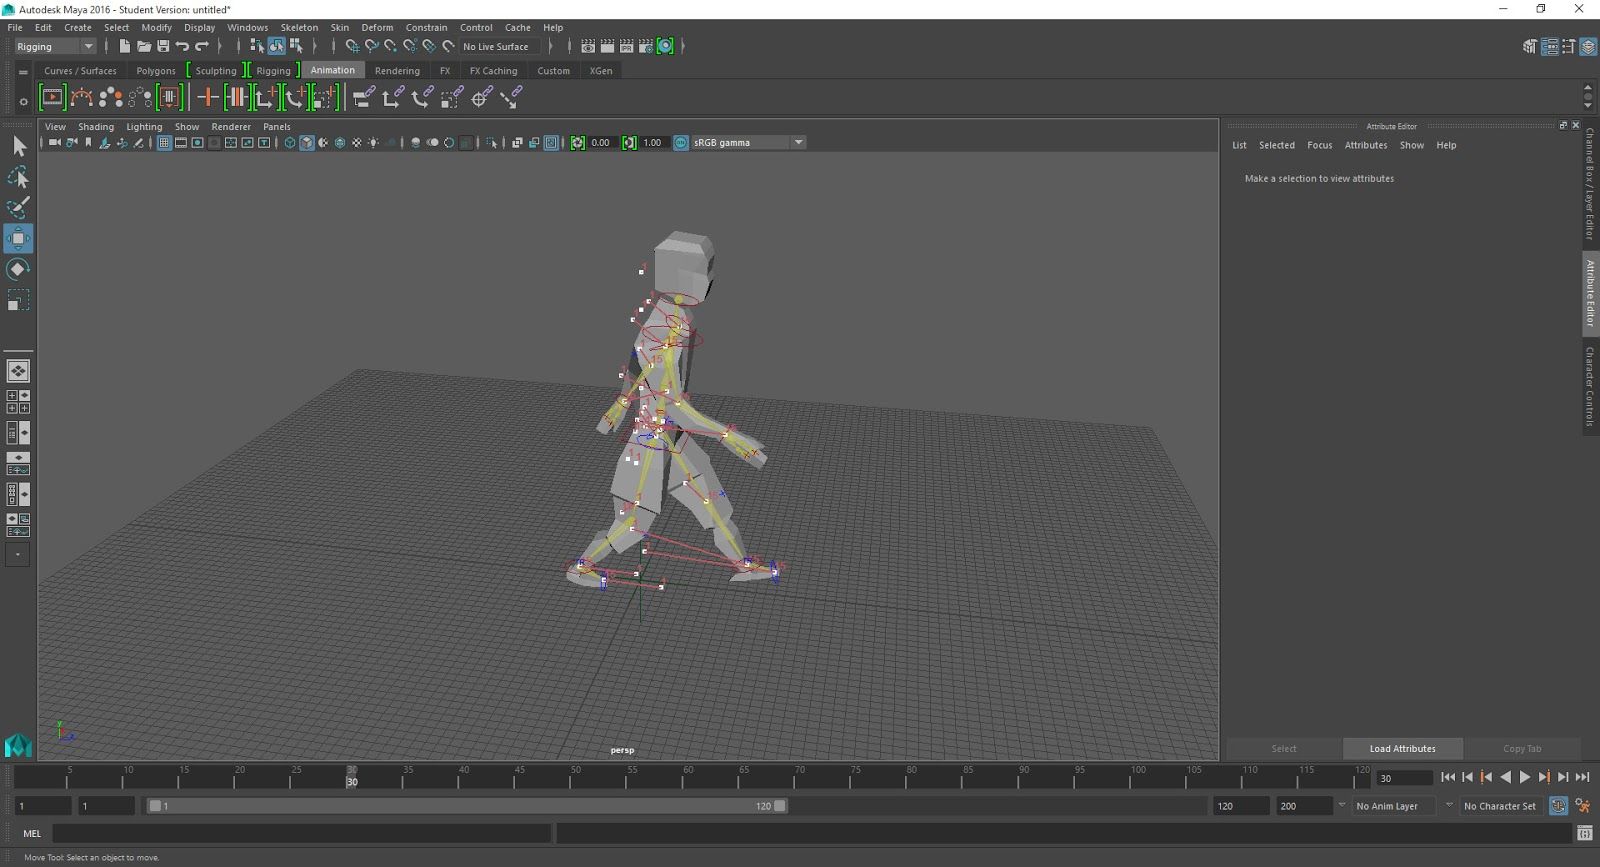 Unity5 Project: Autodesk Maya Animation to Unity | A Short Game from Start  to Finish